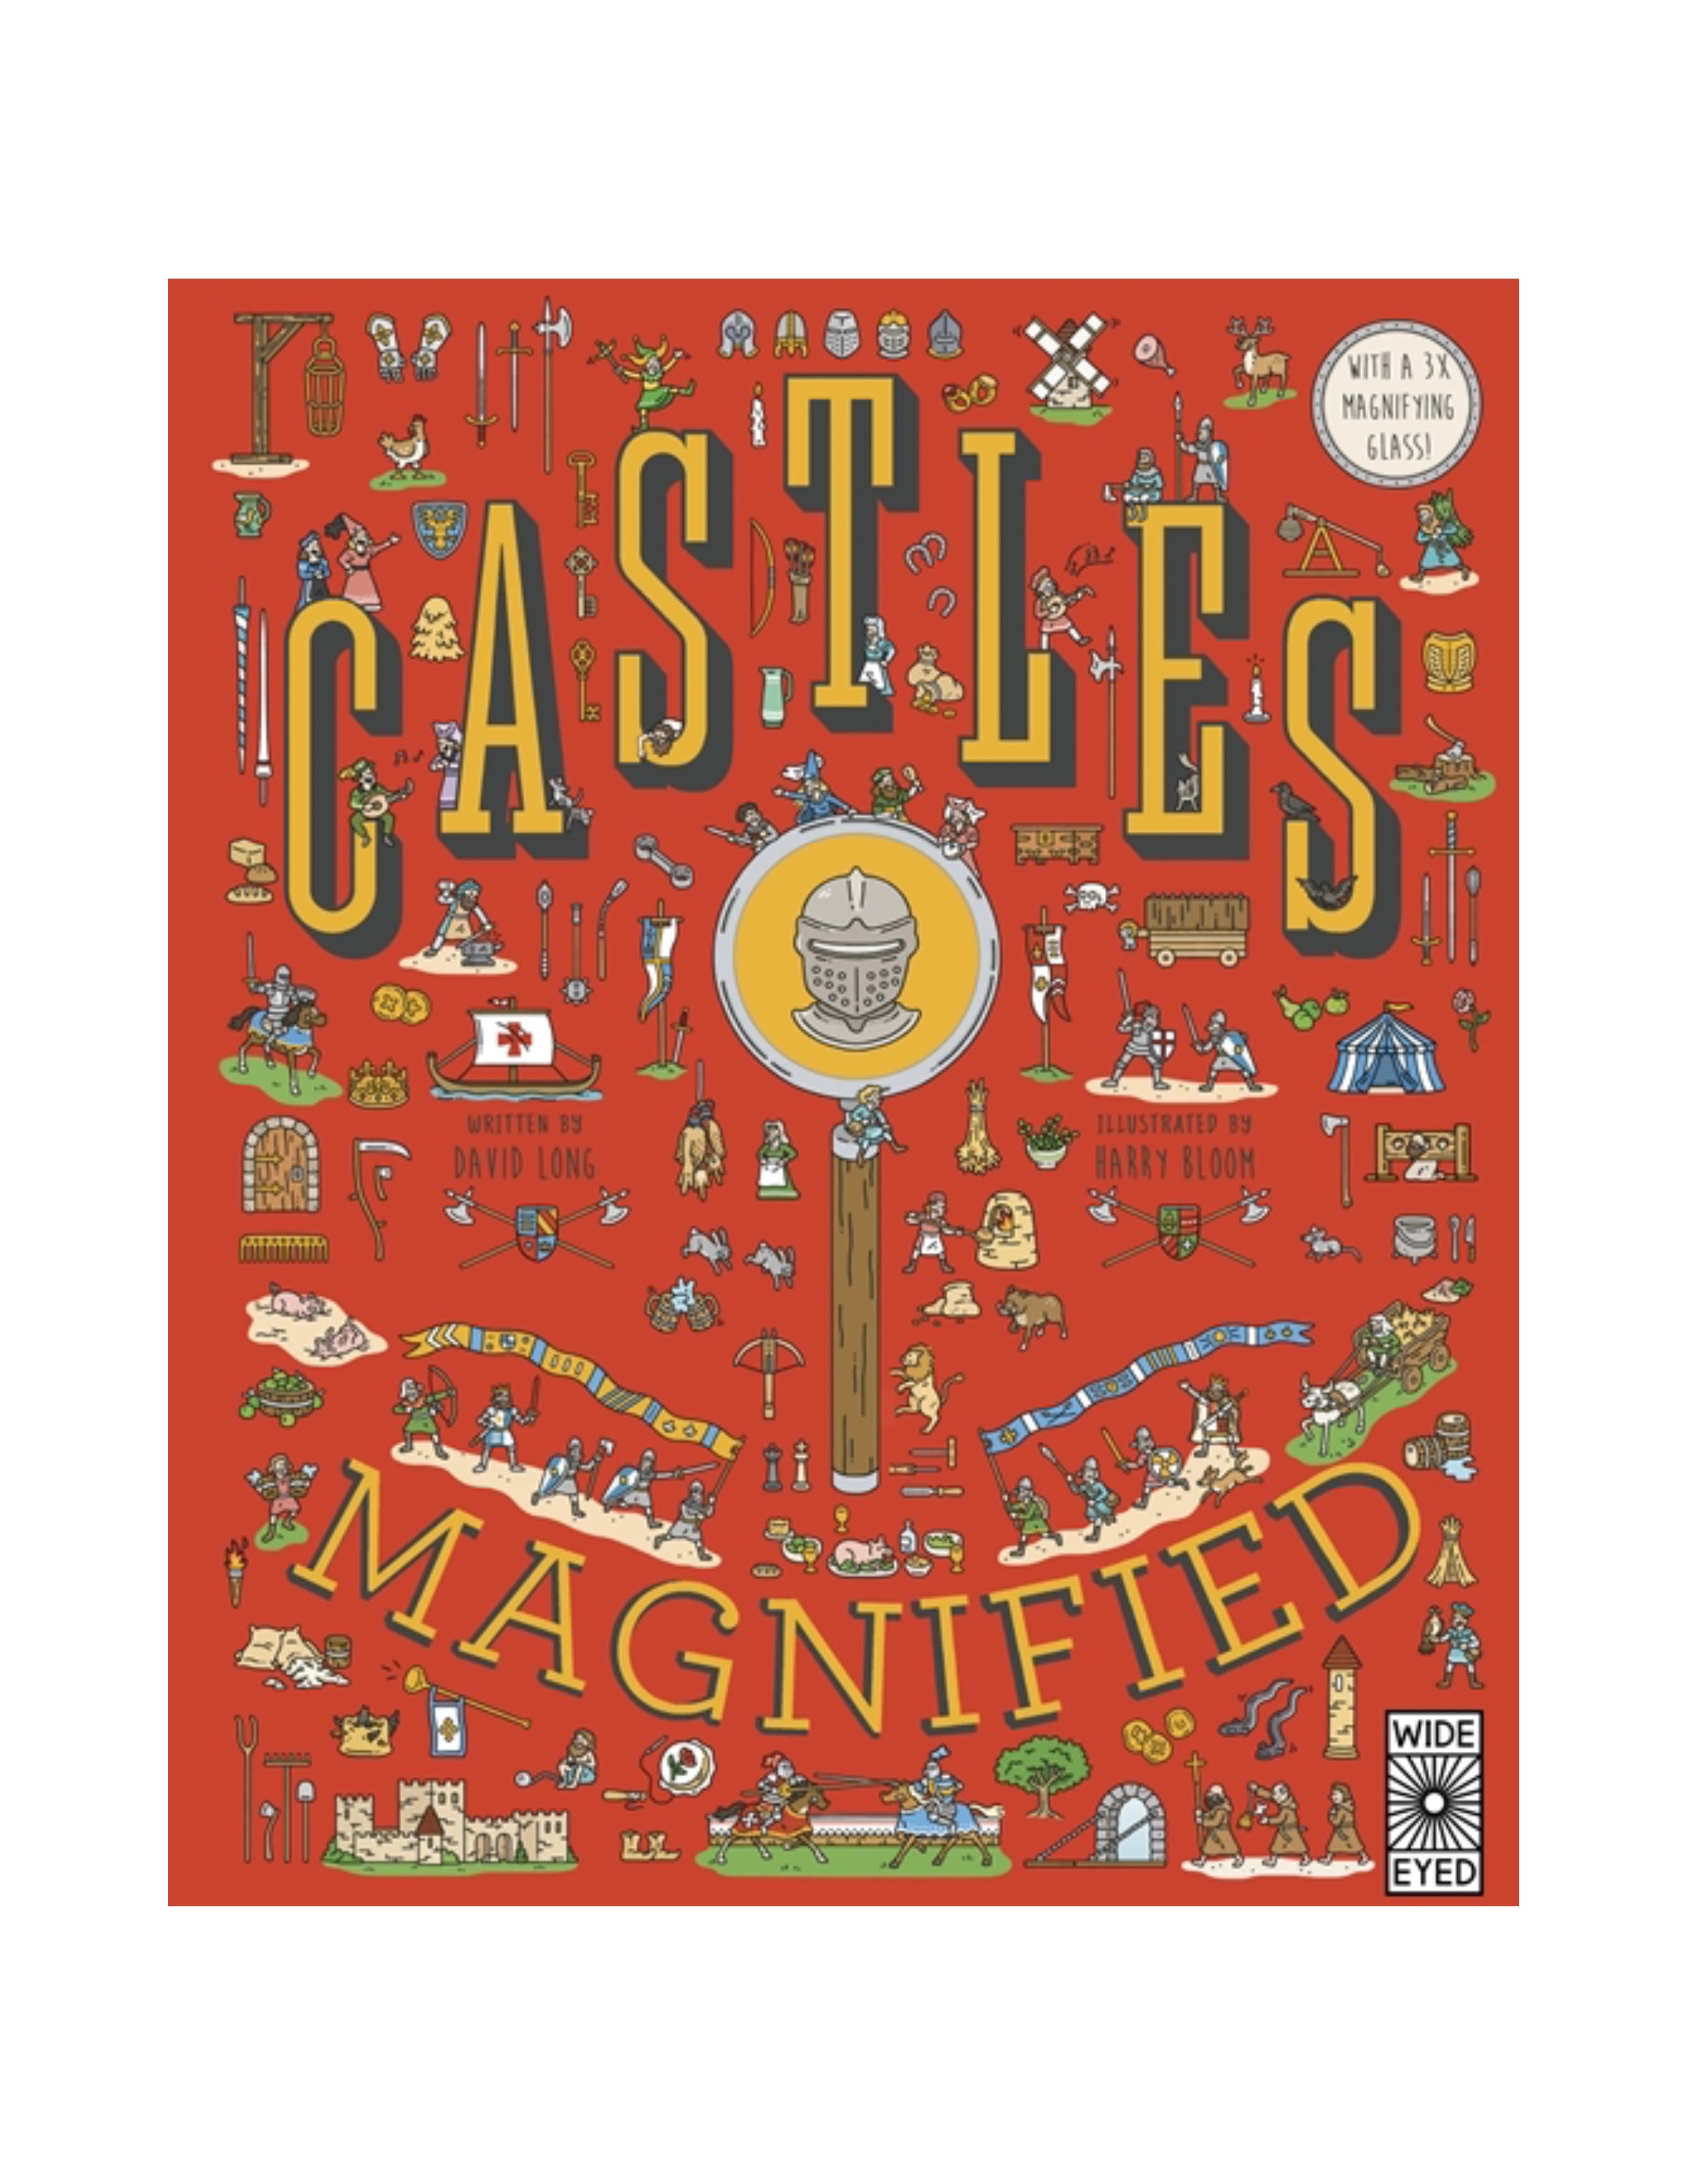 Castles Magnified